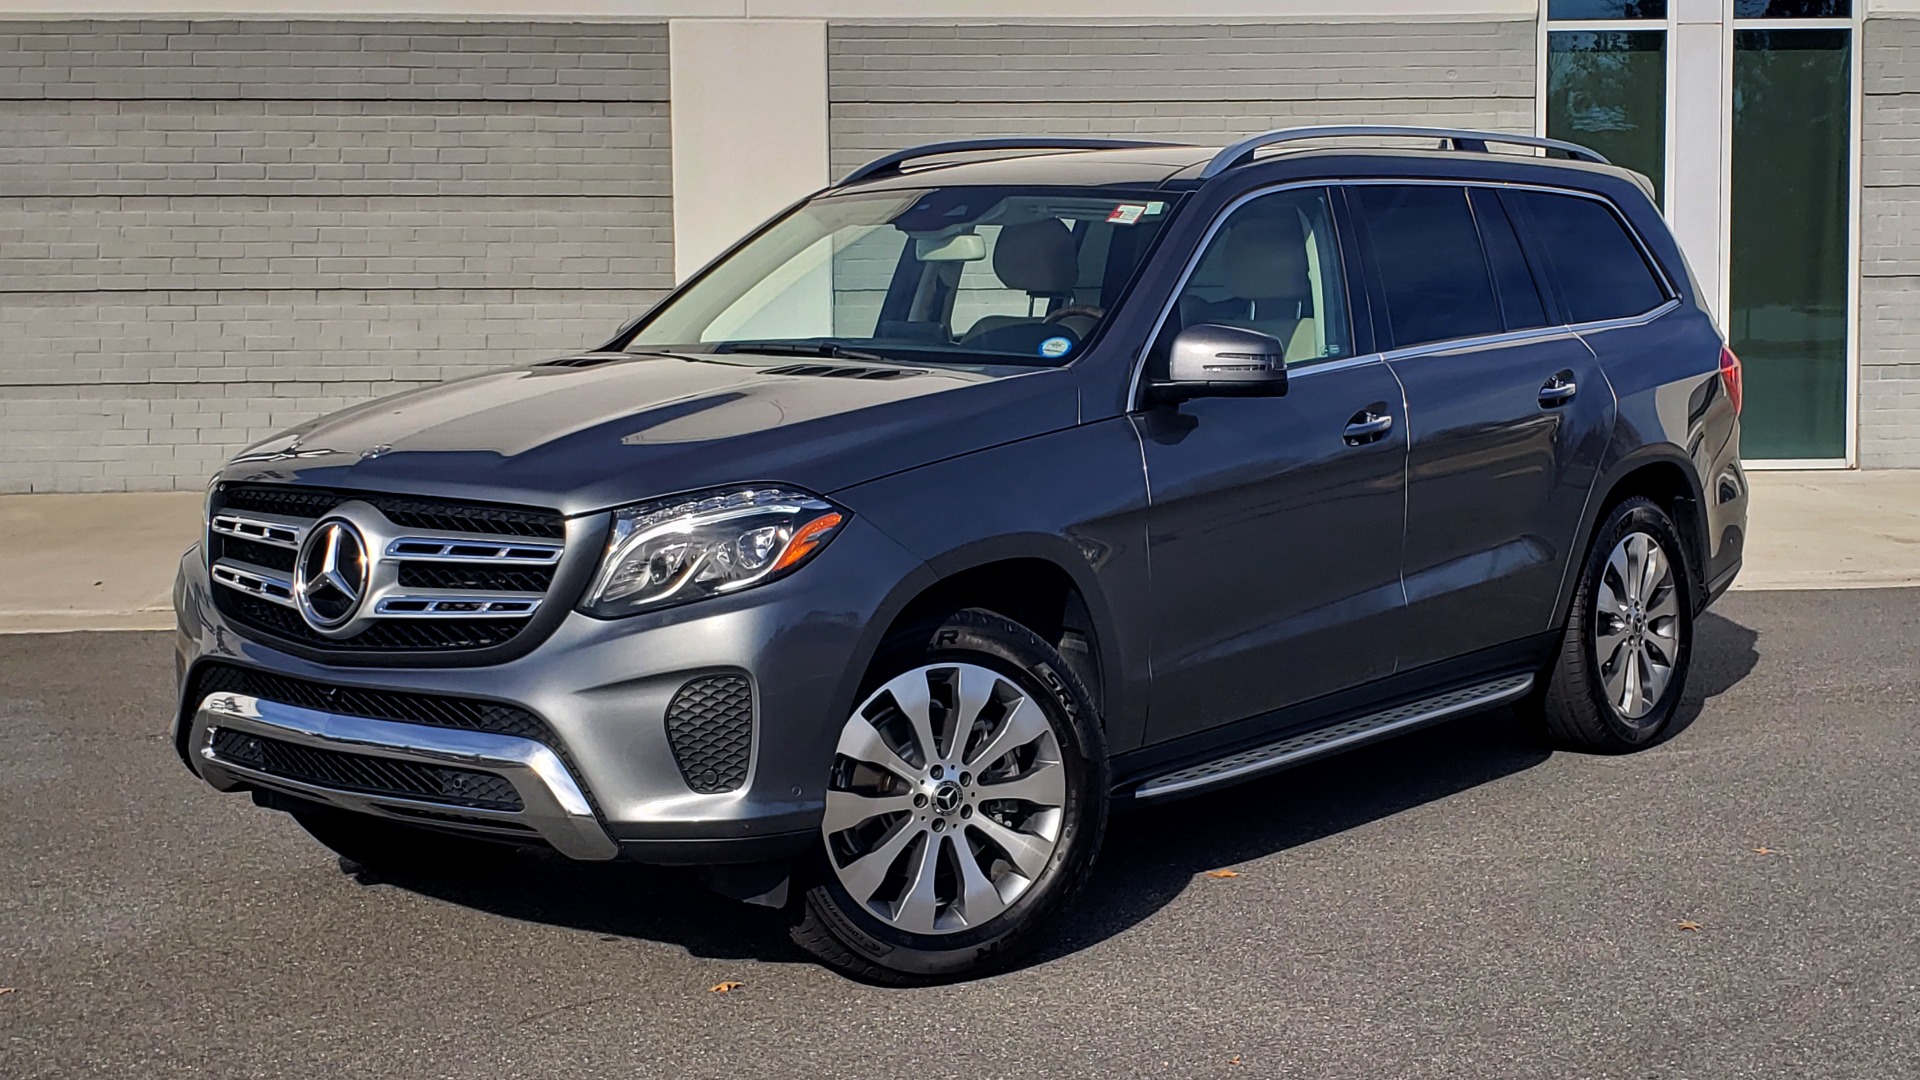 Used 2018 Mercedes-Benz GLS 450 4MATIC PREMIUM / PARK ASST / NAV / PANO-ROOF / 3-ROW / REARVIEW for sale $54,395 at Formula Imports in Charlotte NC 28227 1